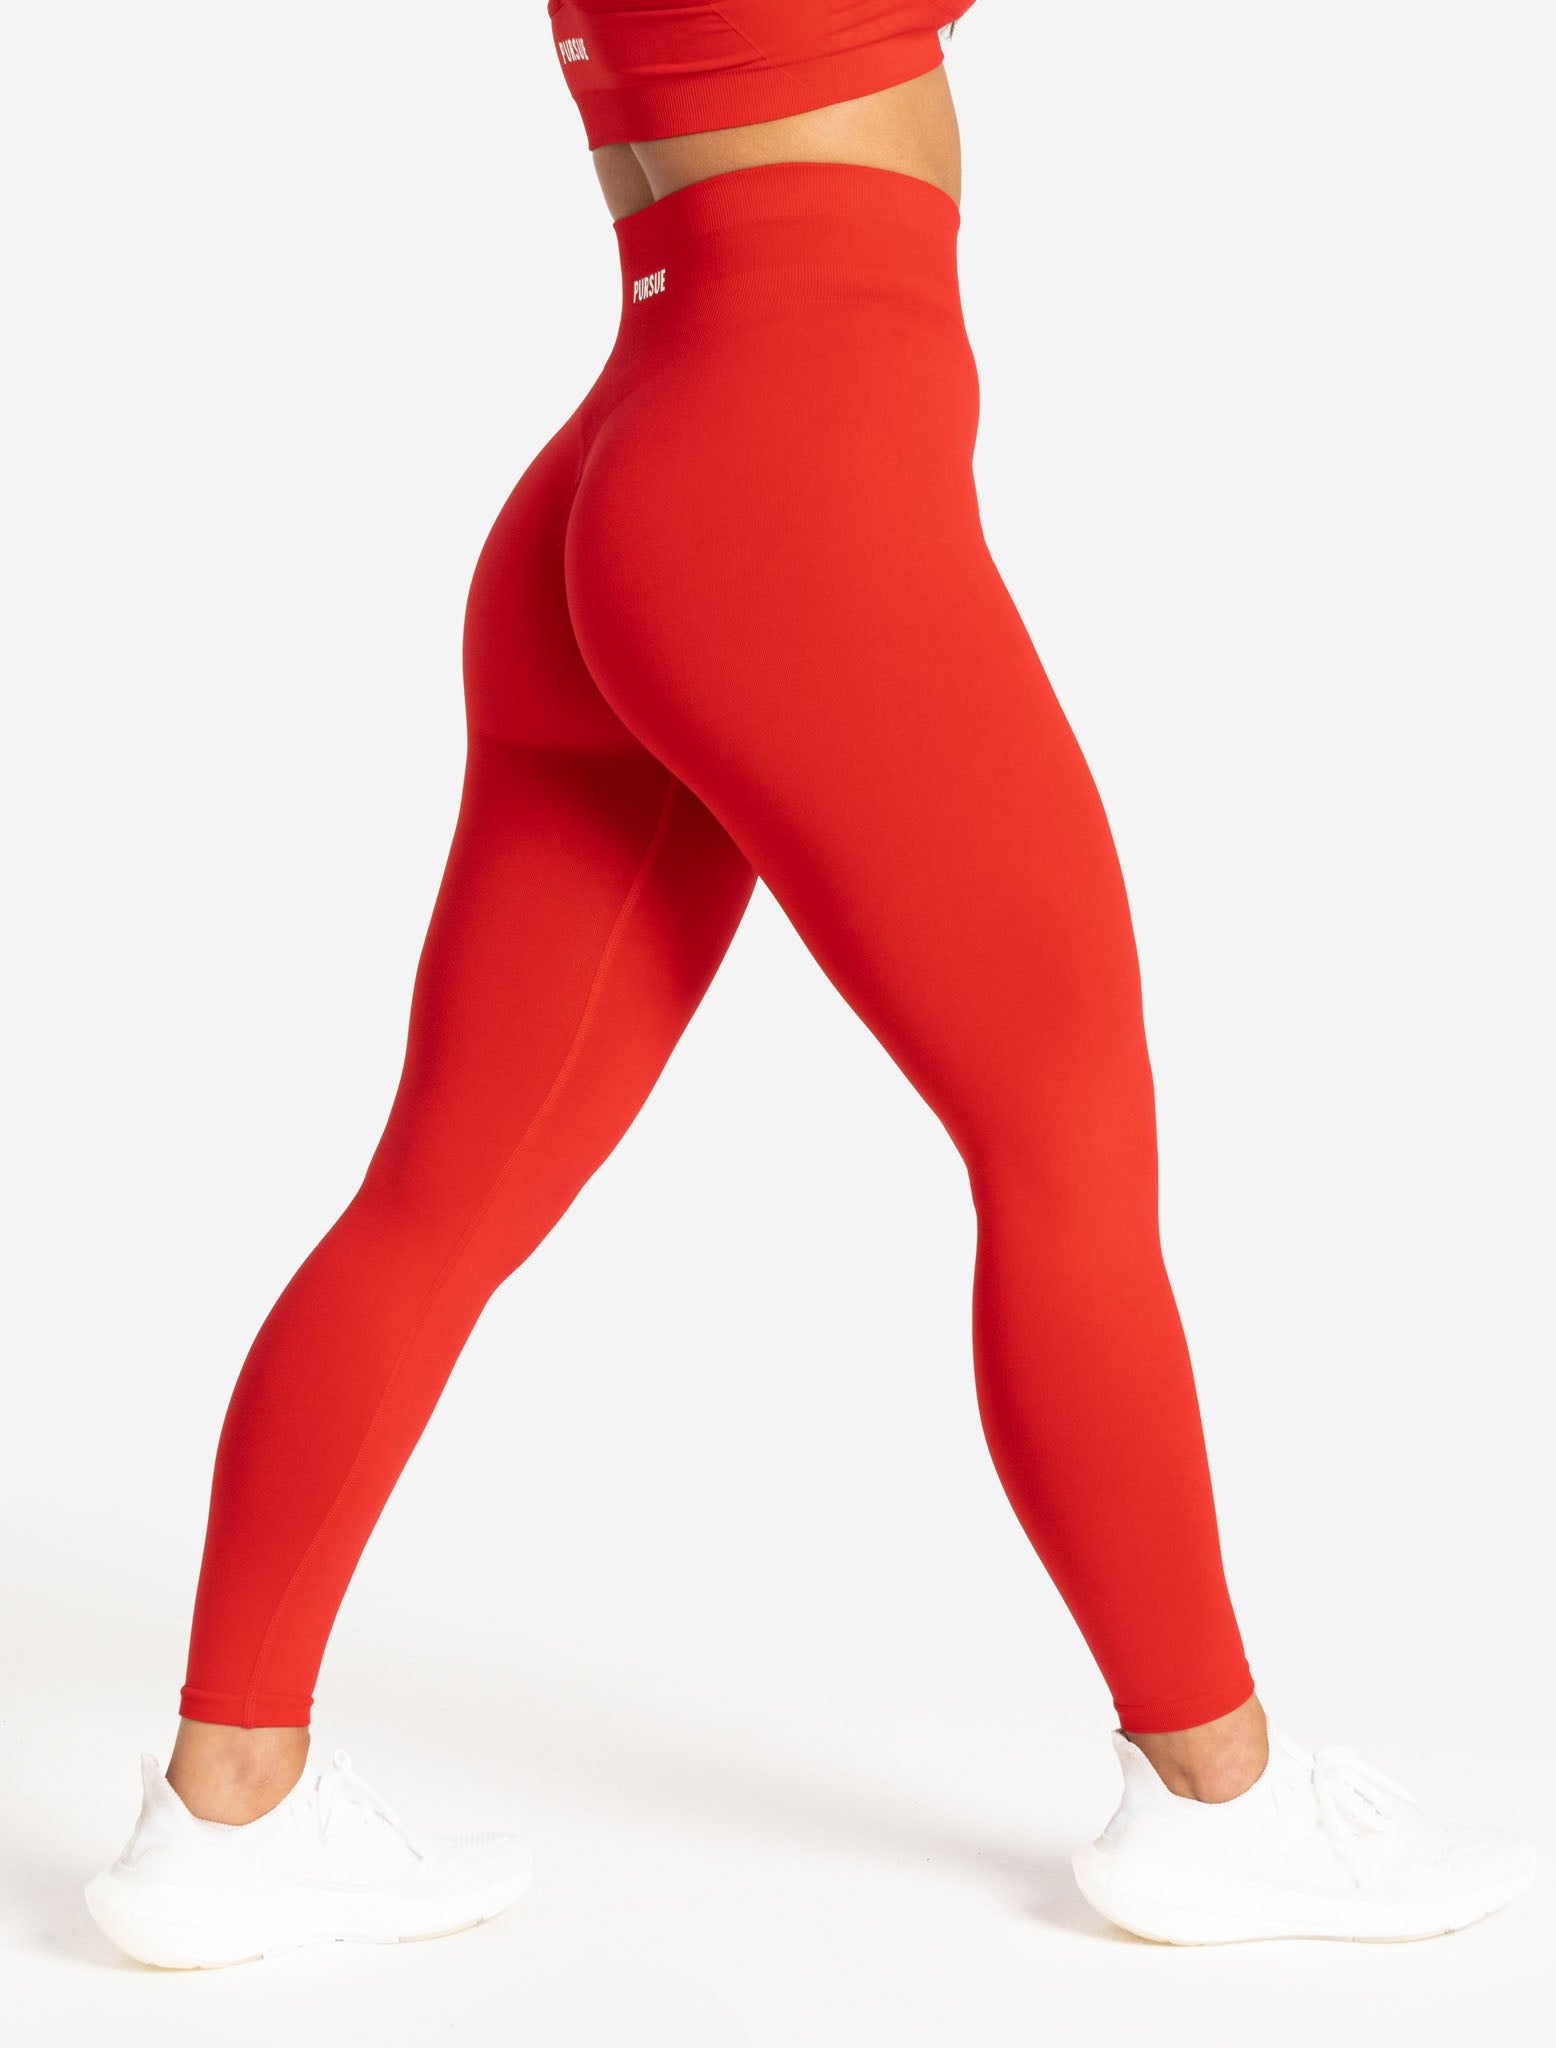 Scrunch Seamless Leggings / Candy Red Pursue Fitness 5